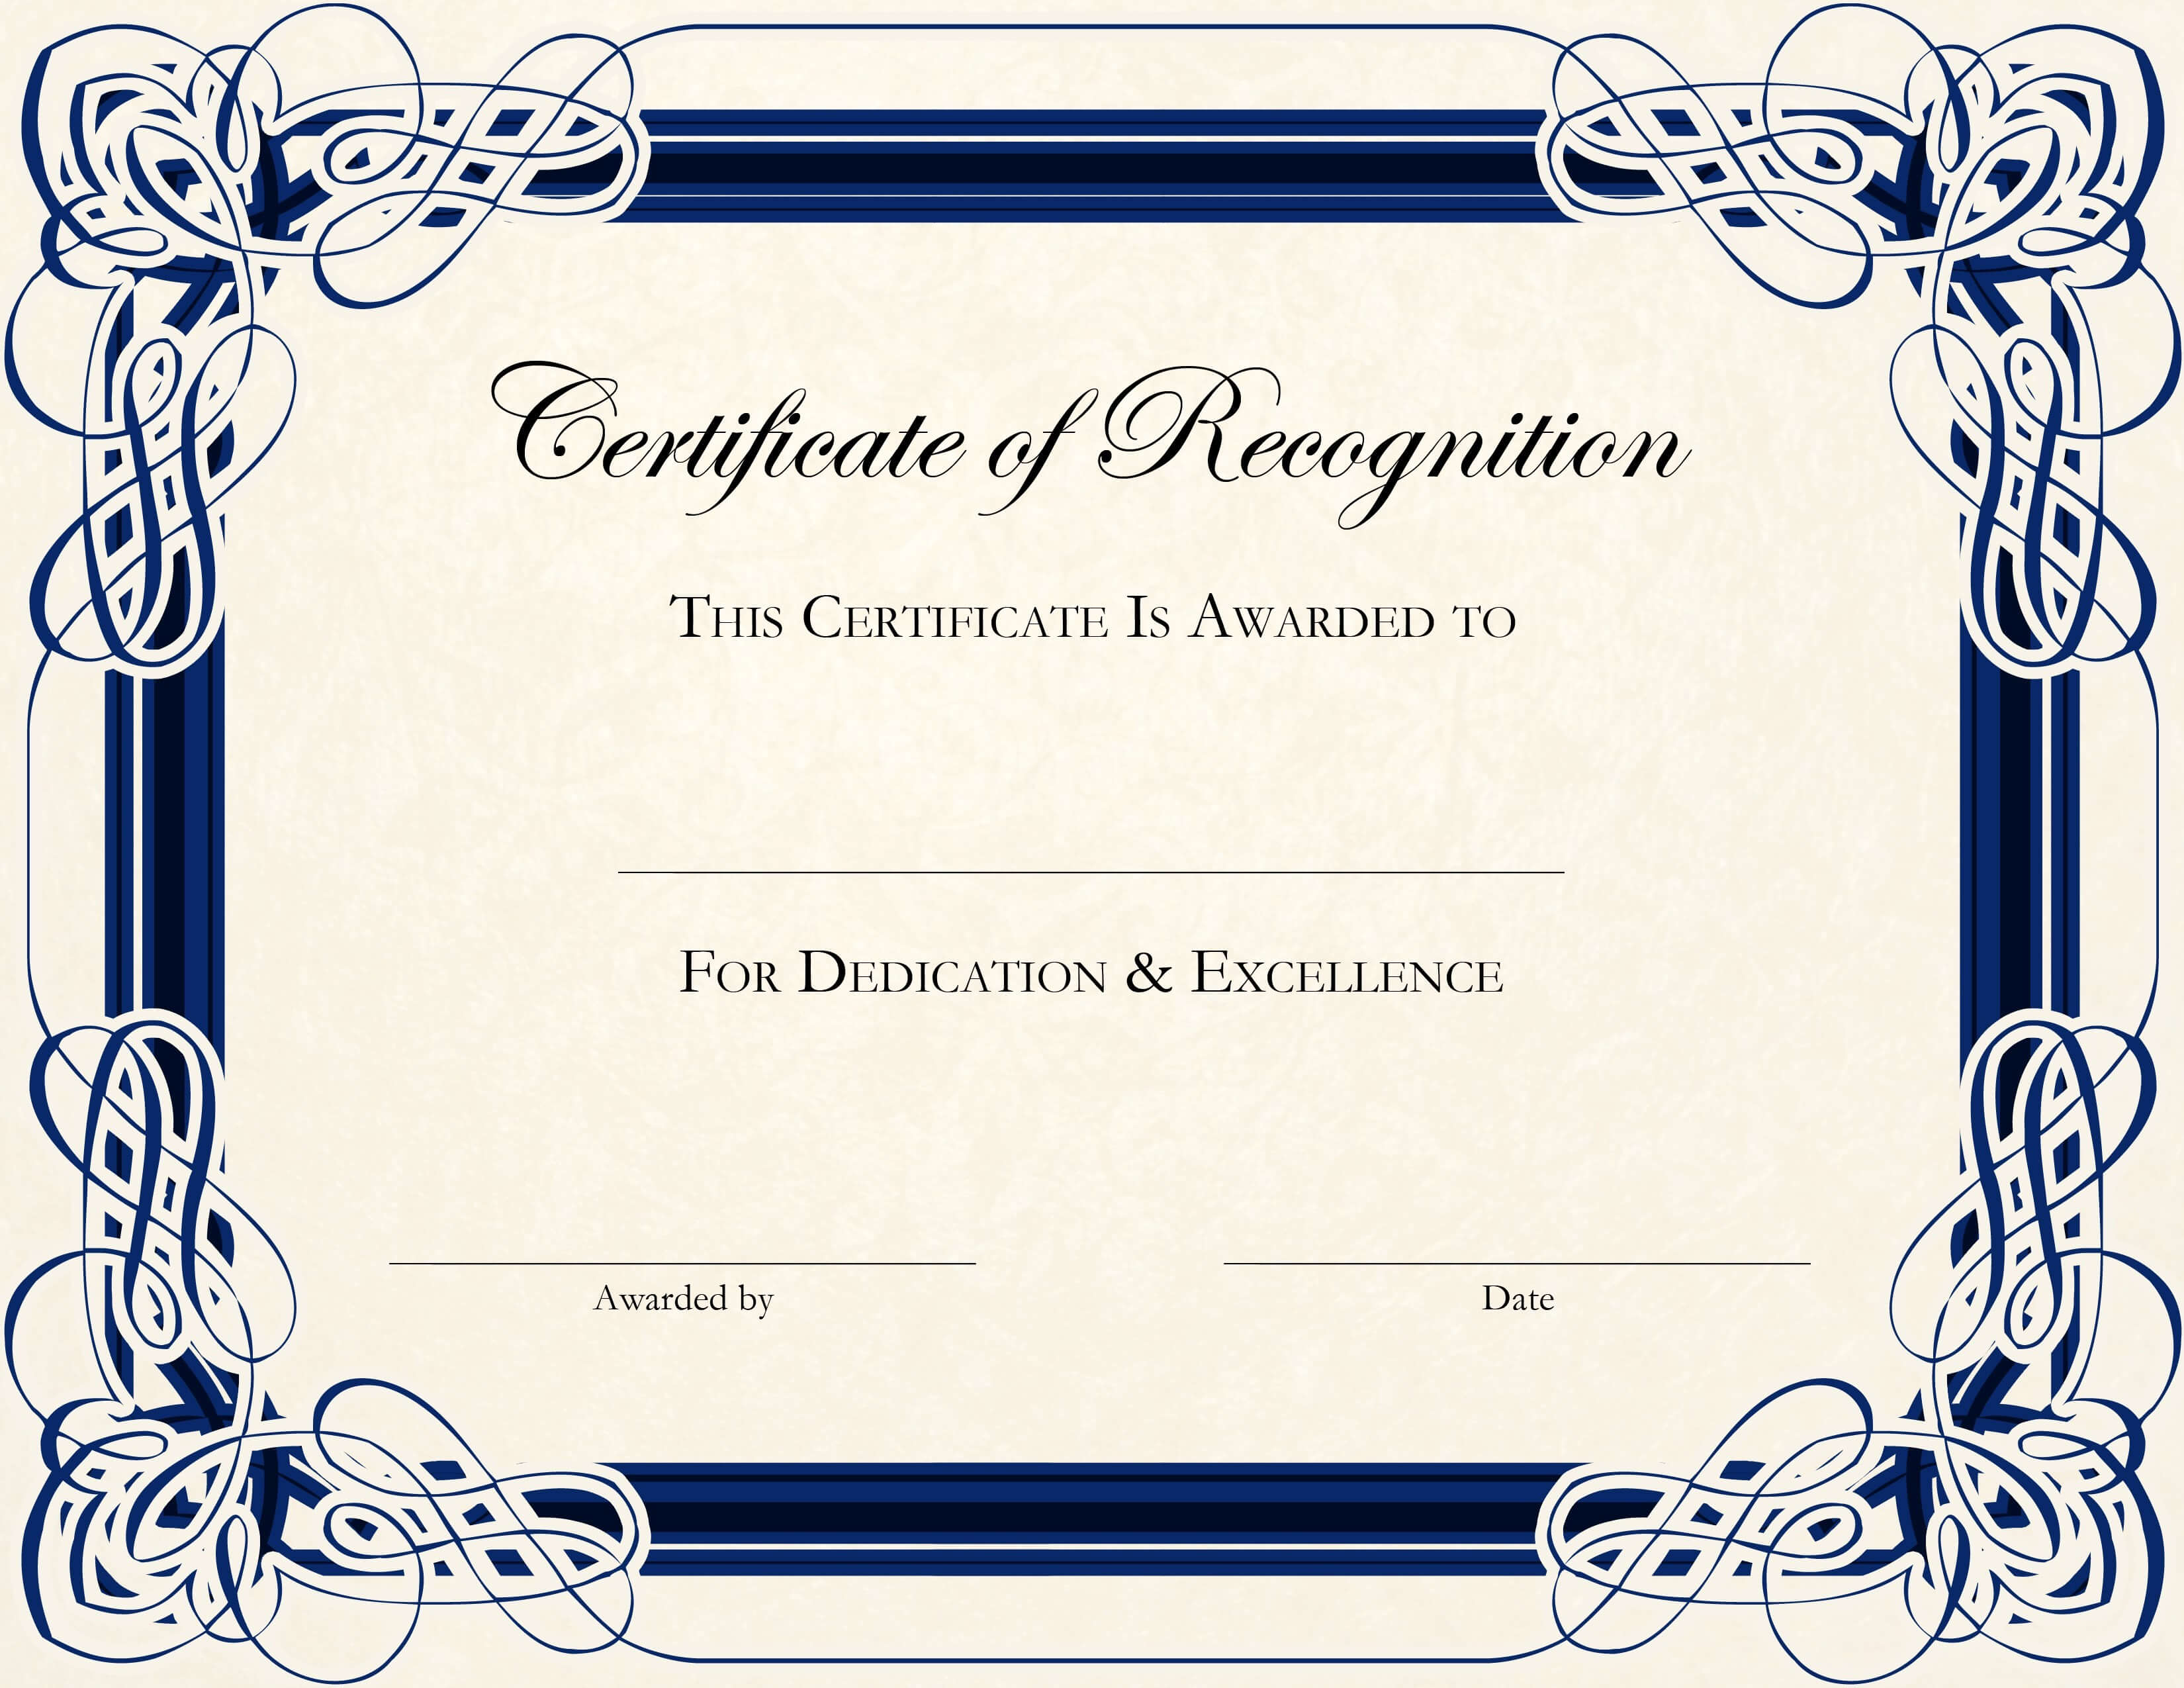 Gold Certificate Template Word | Certificatetemplateword Regarding Free Funny Award Certificate Templates For Word